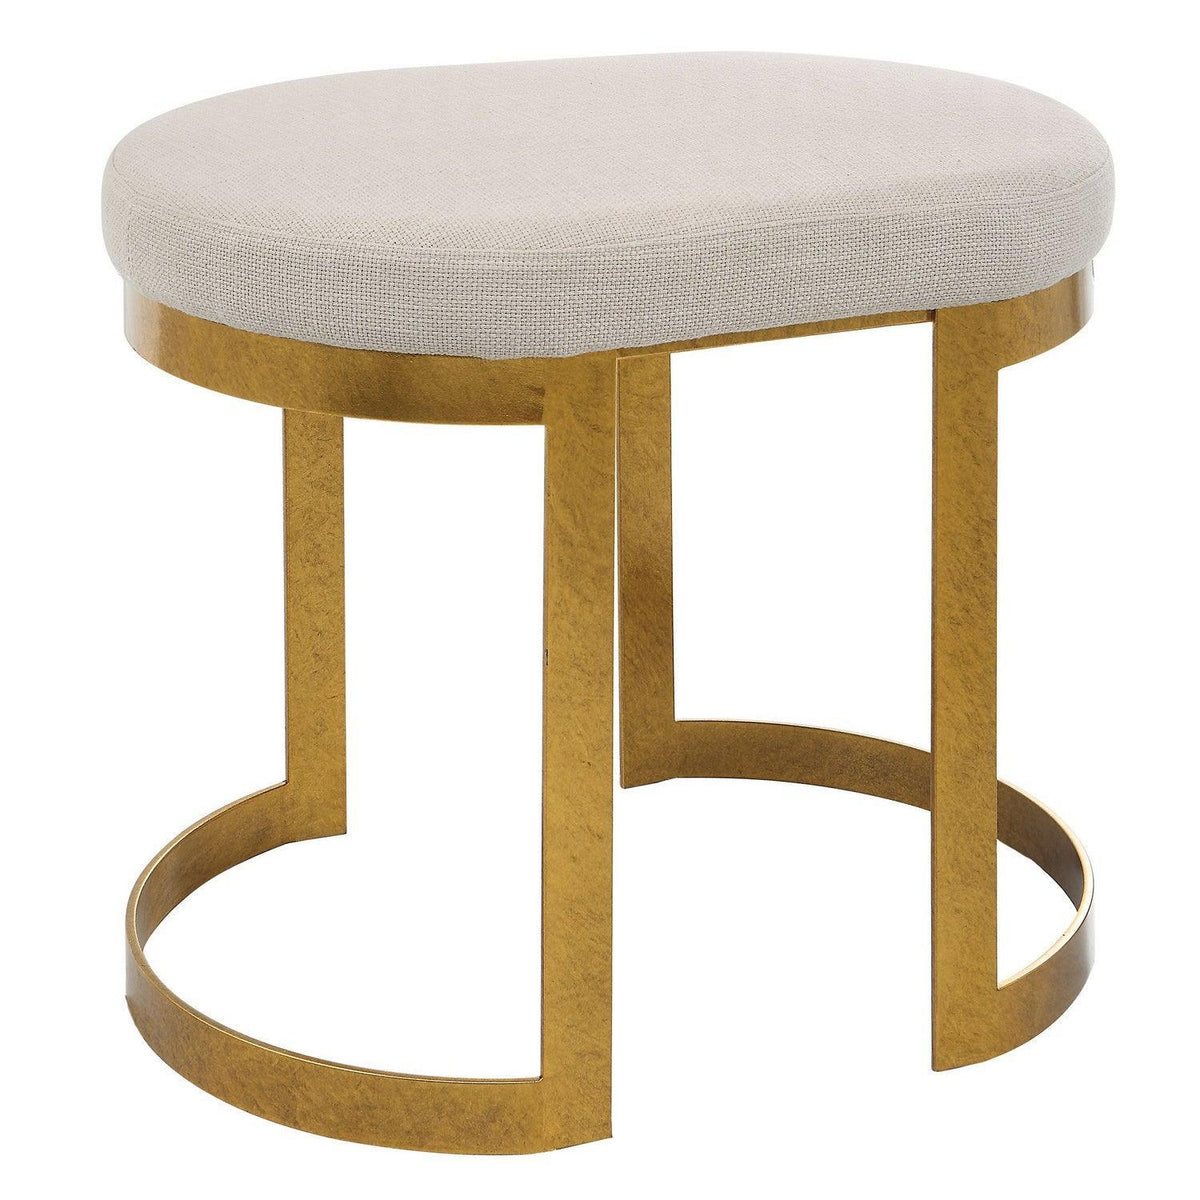 The Uttermost - Infinity Accent Stool - 23698 | Montreal Lighting & Hardware